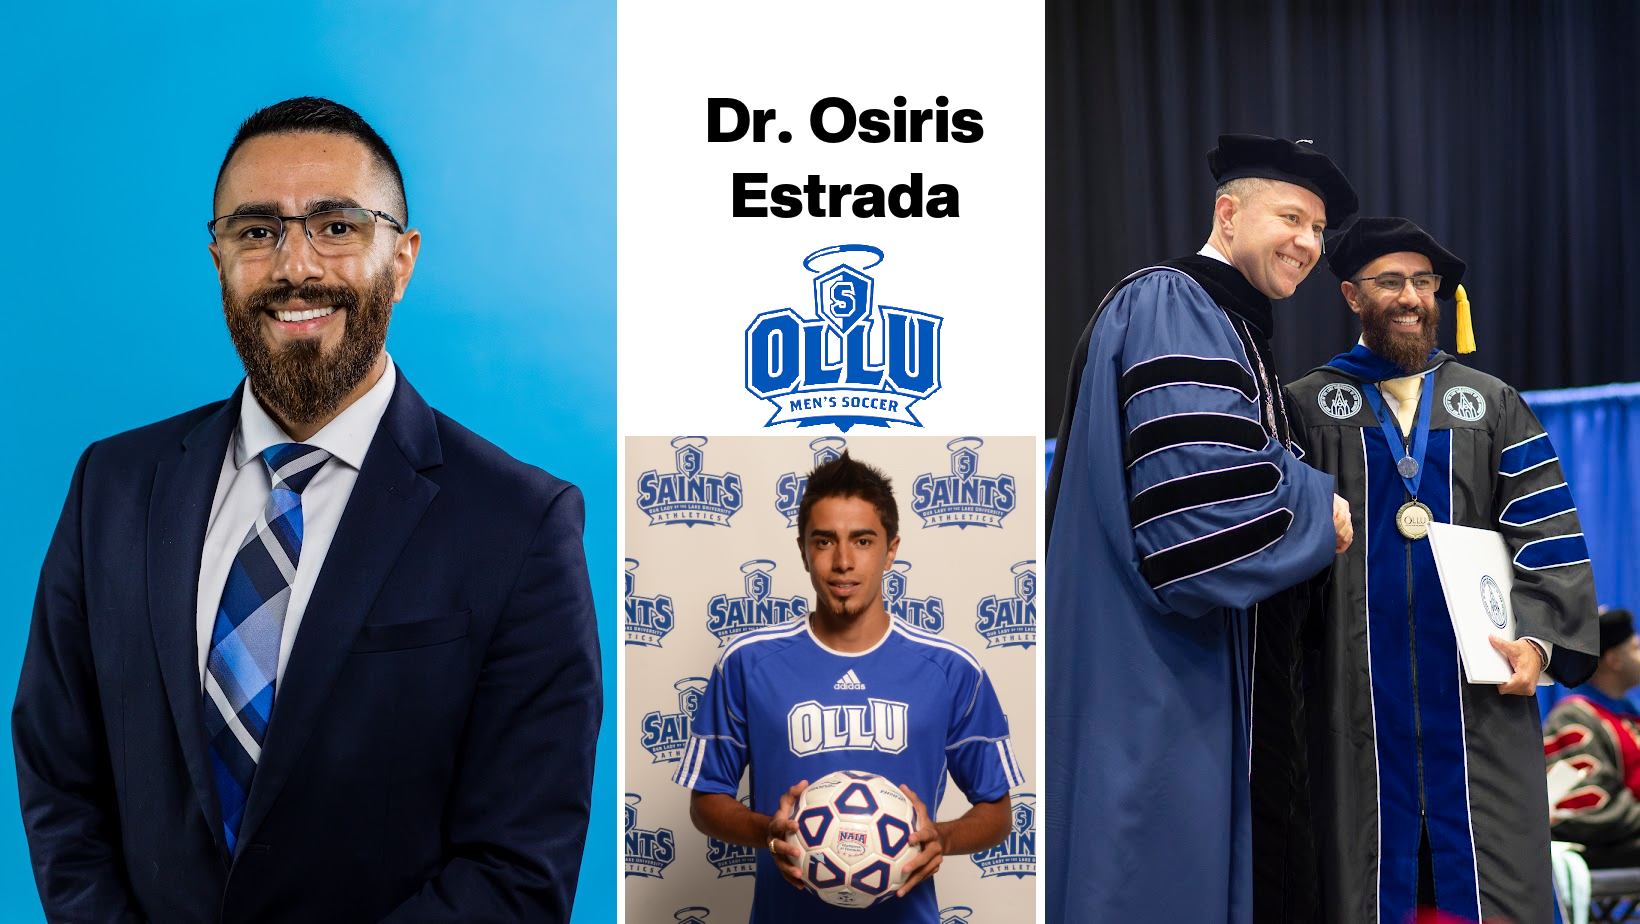 Soccer's Dr. Osiris Estrada First Athlete to Earn Doctorate from OLLU